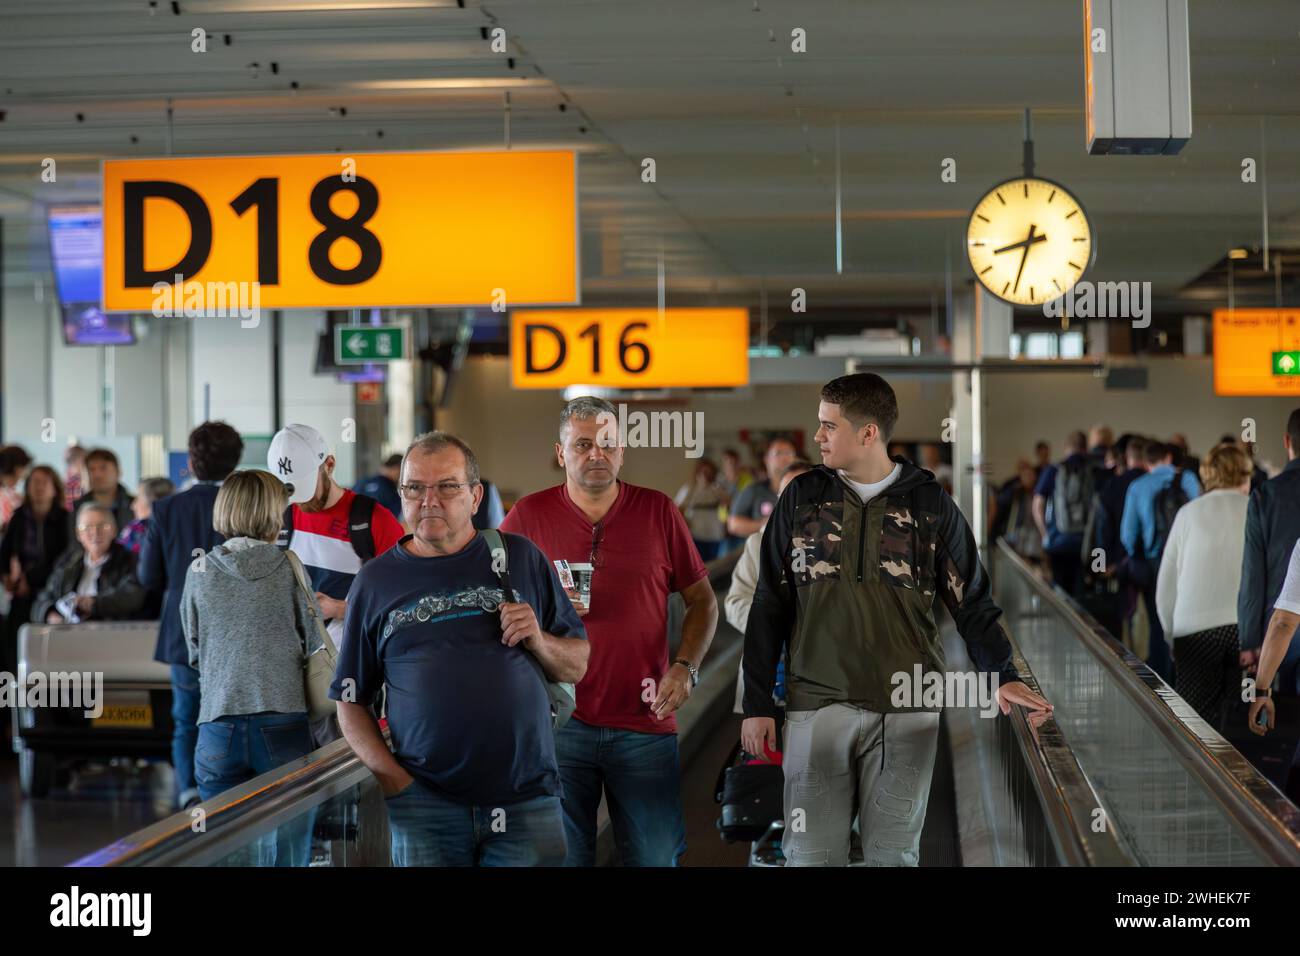 '09.07.2019, Netherlands, North Holland, Amsterdam - Gates and escalators in the transit area at Amsterdam Airport Schiphol (AMS). 00A190709D062CAROEX Stock Photo